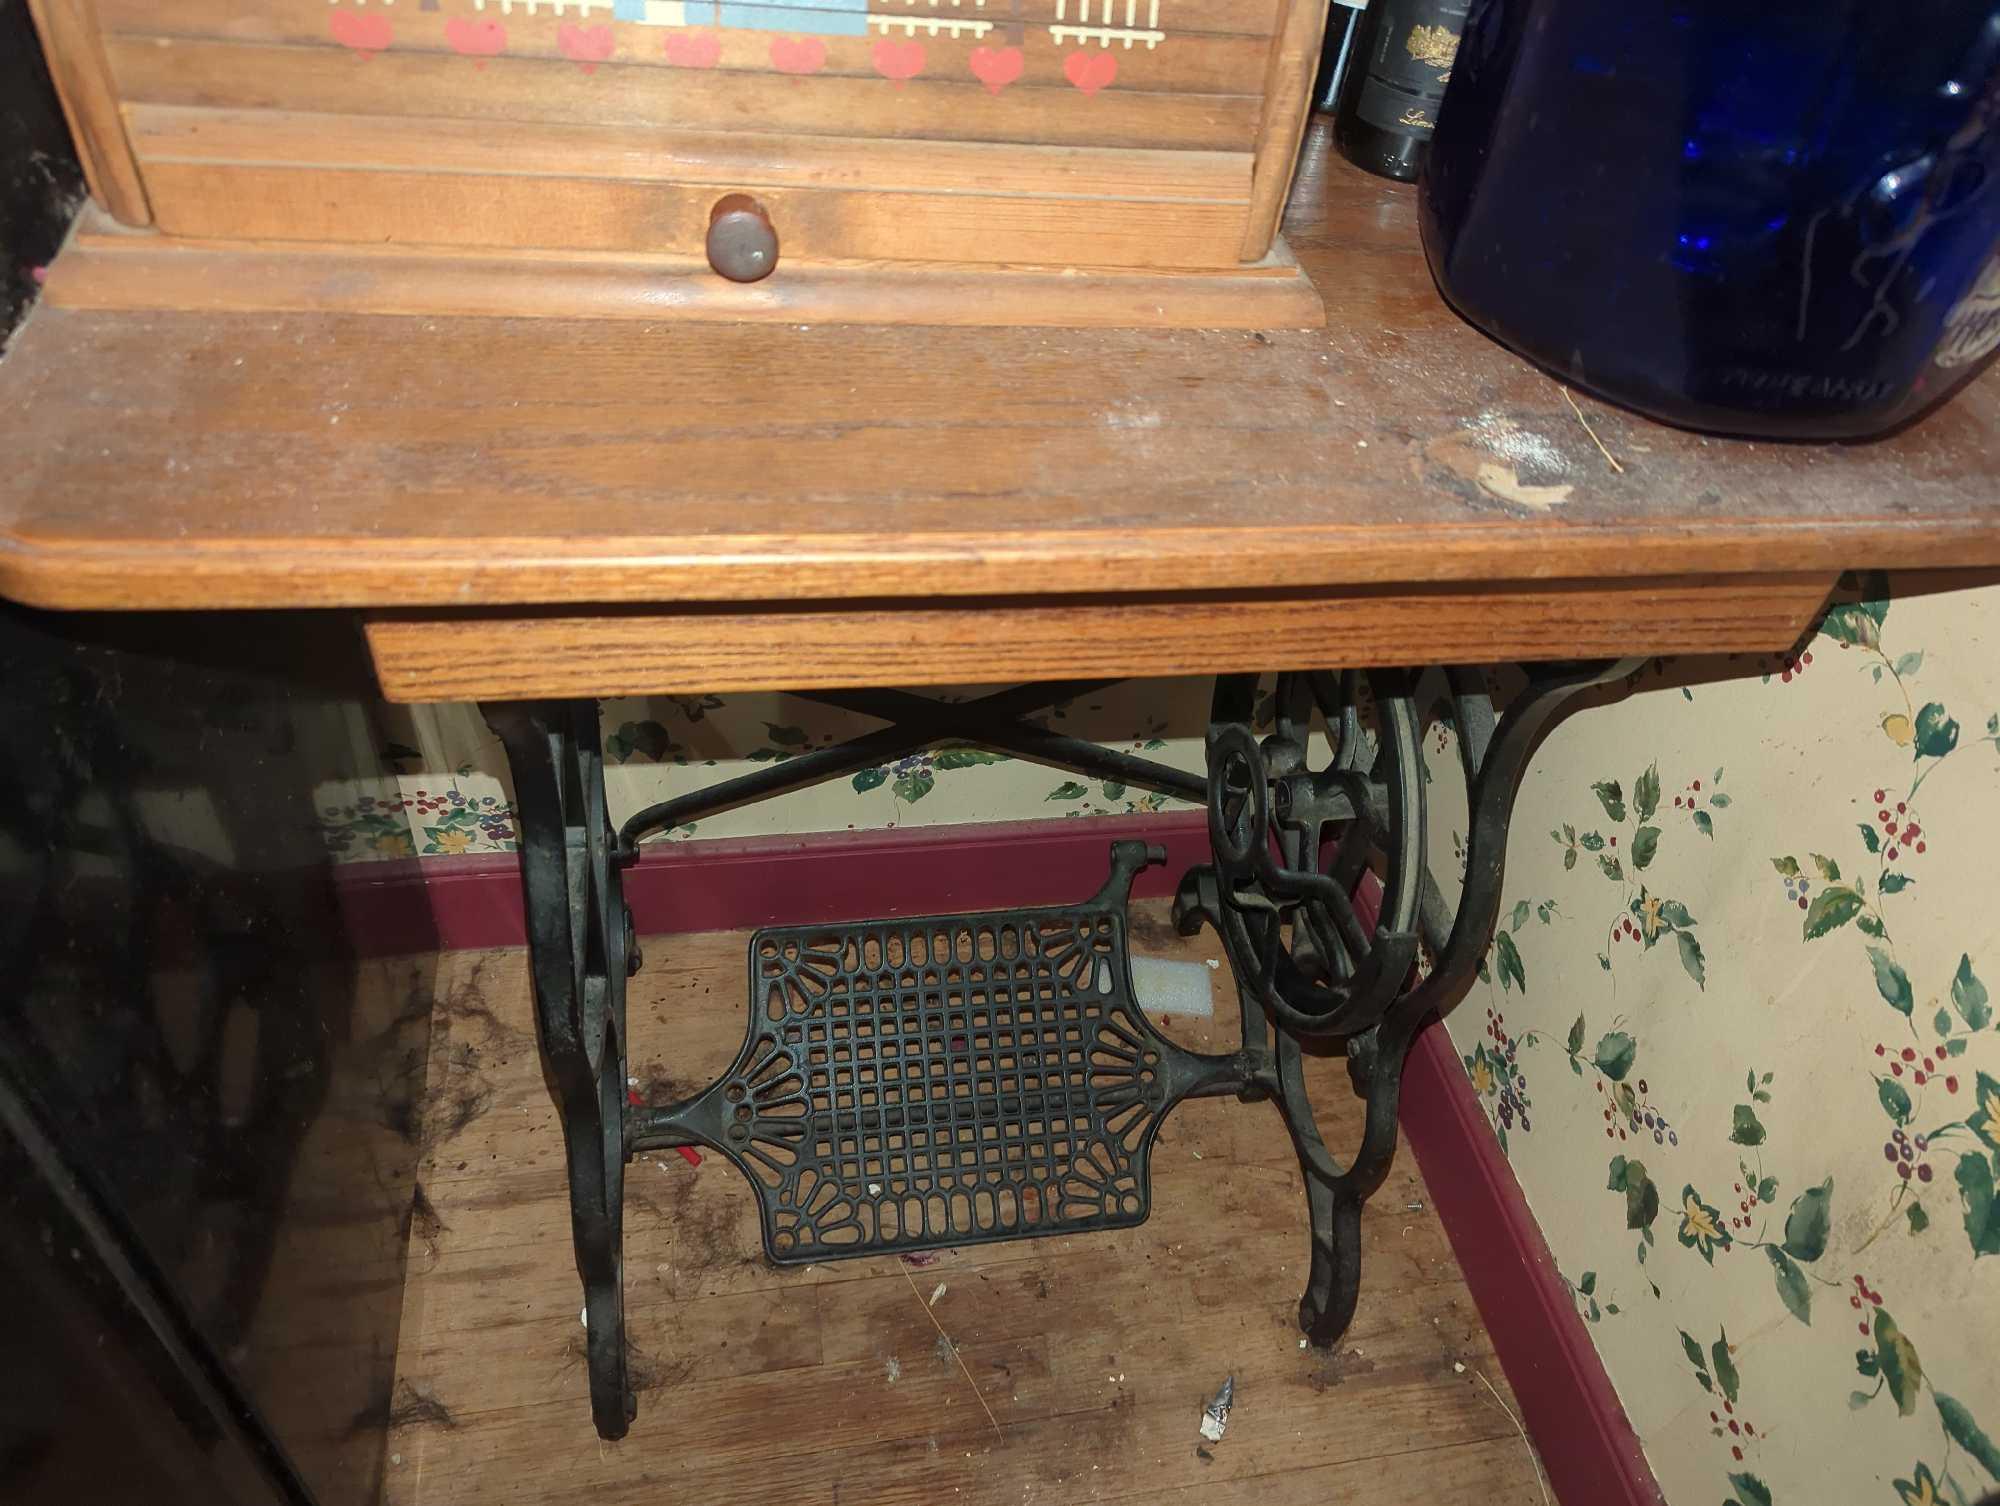 (DR) OLD STYLE SEWING MACHINE TABLE, TABLE TOP HAS SOME DAMAGE, APPROXIMATE DIMENSIONS - 30" H X 30"